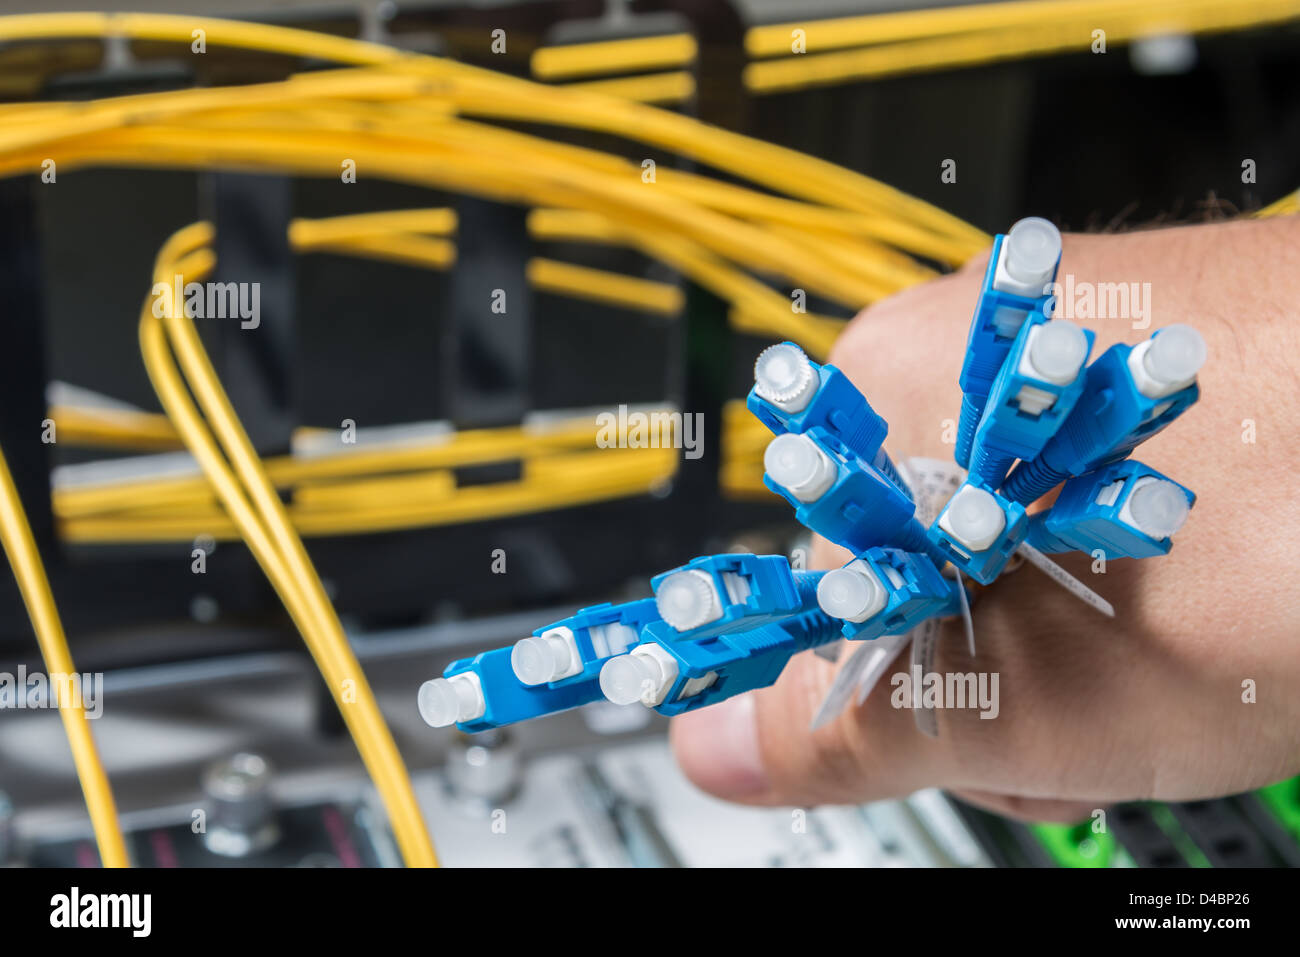 hand of administrator holding bunch of optic fiber cables with connectors Stock Photo